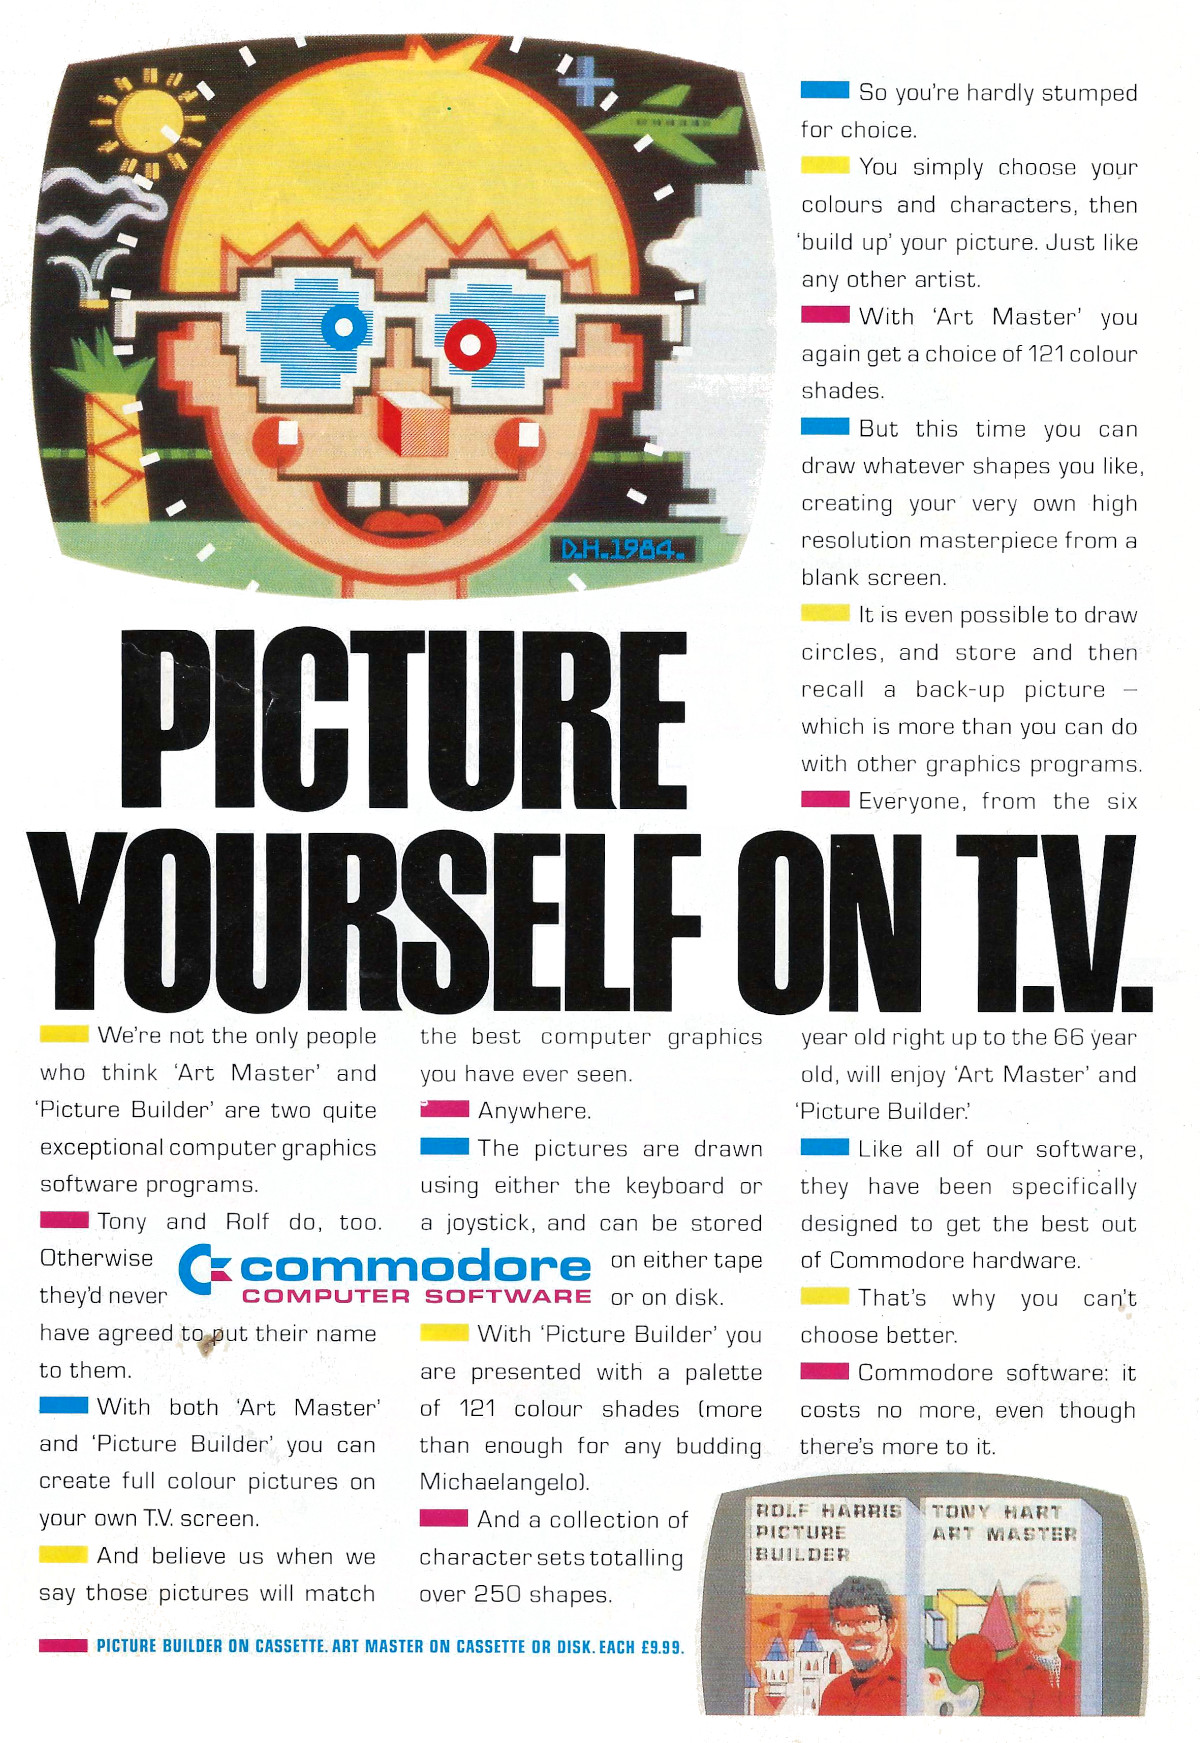 A Commodore Computer Software advert showing Rolf Harris's Picture Builder and <span class='hilite'>Tony Hart</span>'s Art Master. From Commodore Computing International, November 1984